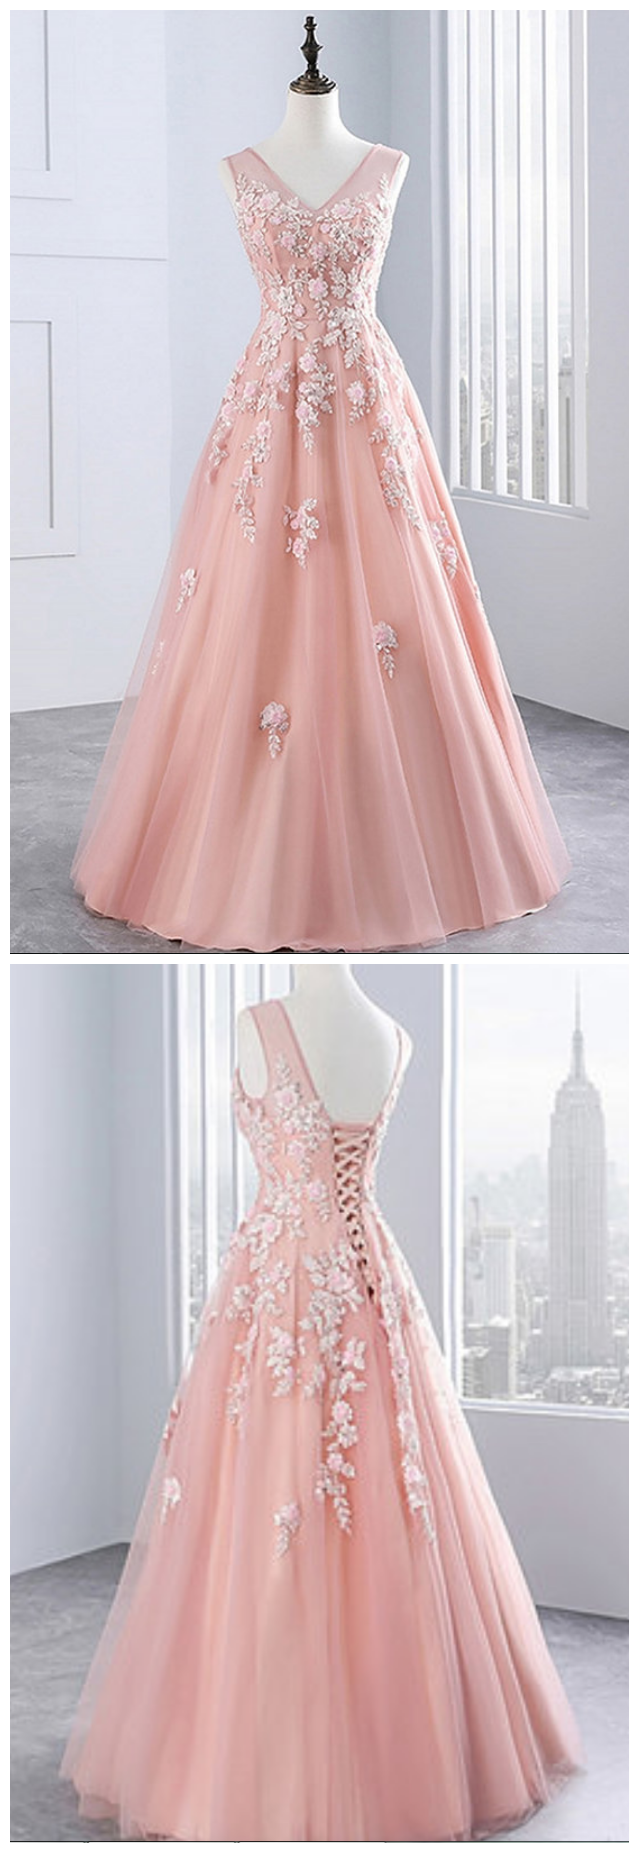 Pink Tulle Prom Dresses,v Neck Evening Dress With Lace Appliqués, Long Sweet 16 Prom Dresses